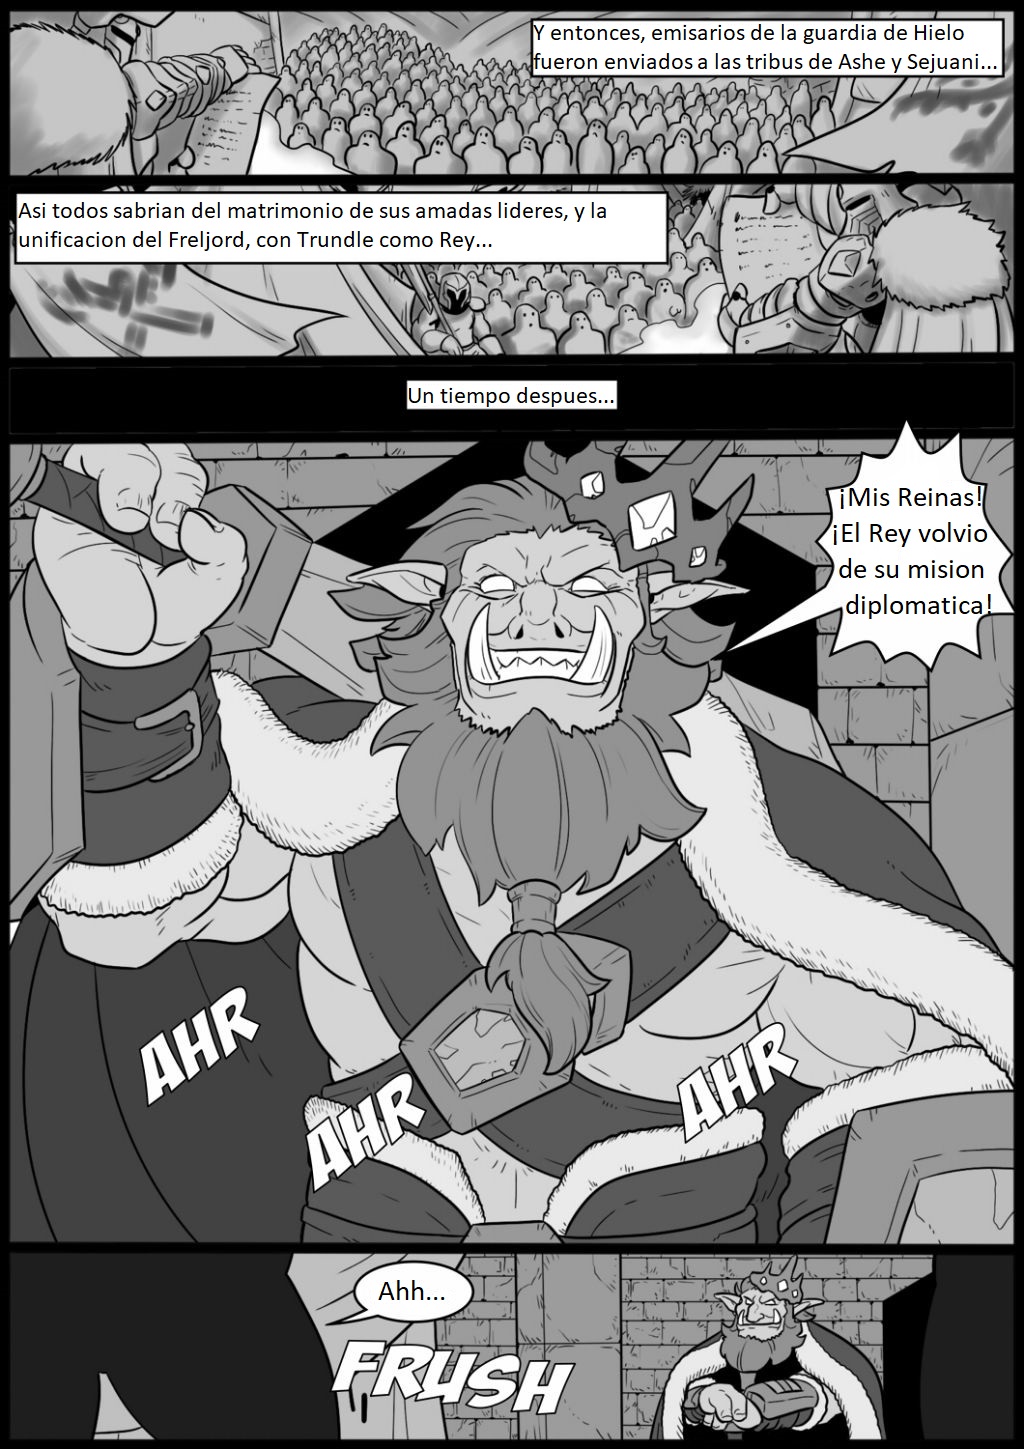 Tales of the Troll King image number 55